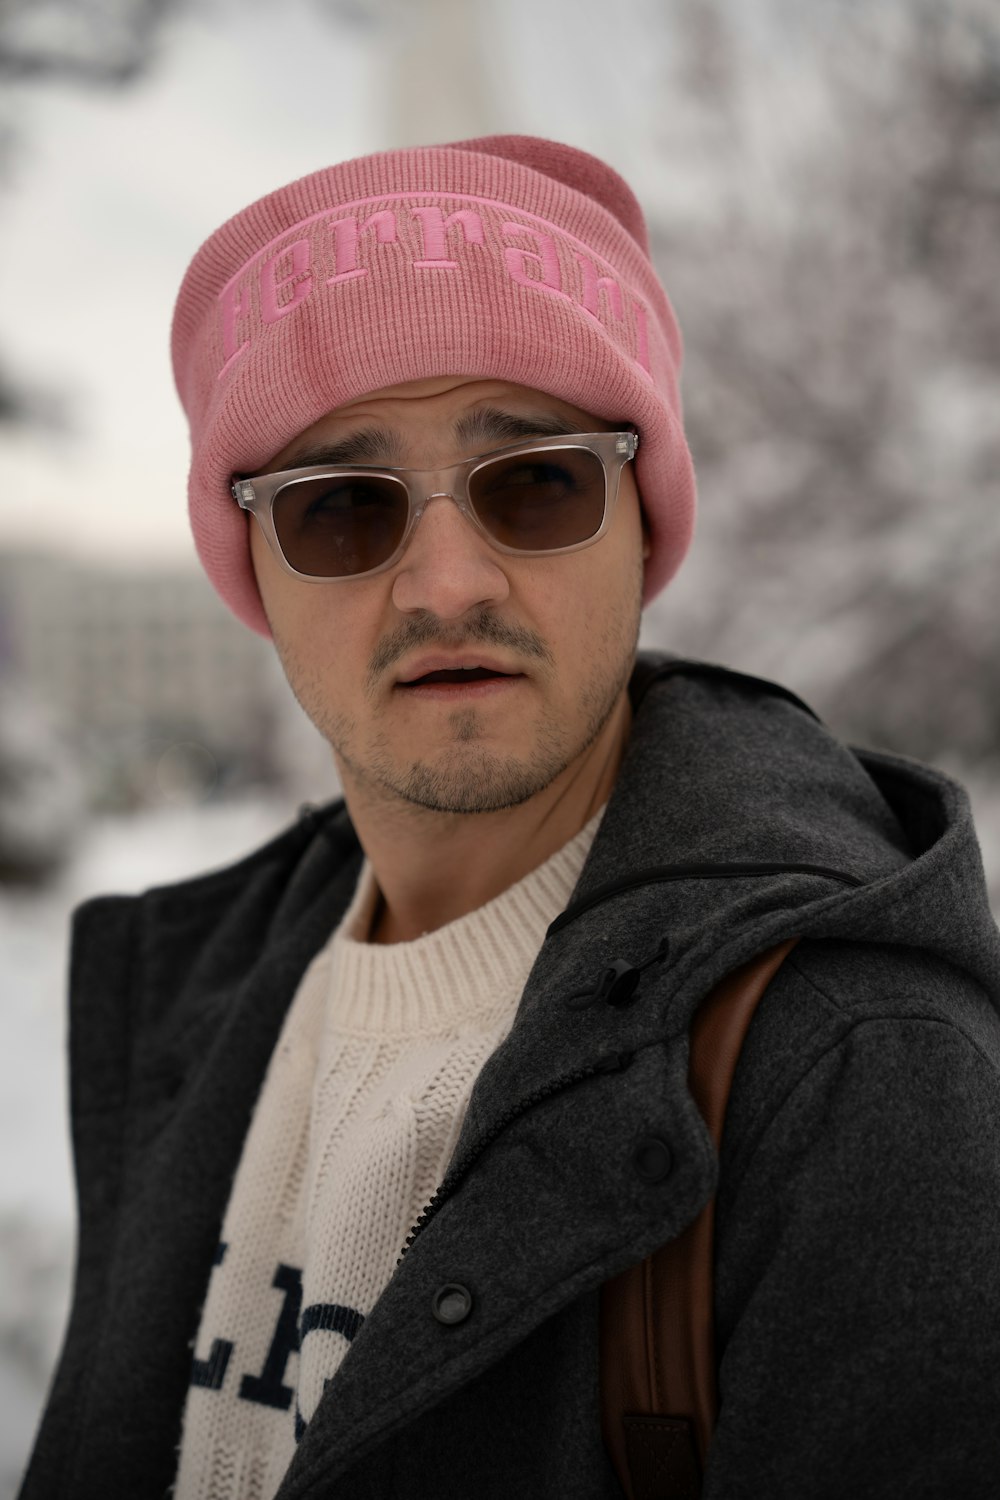 a man wearing a pink hat and sunglasses